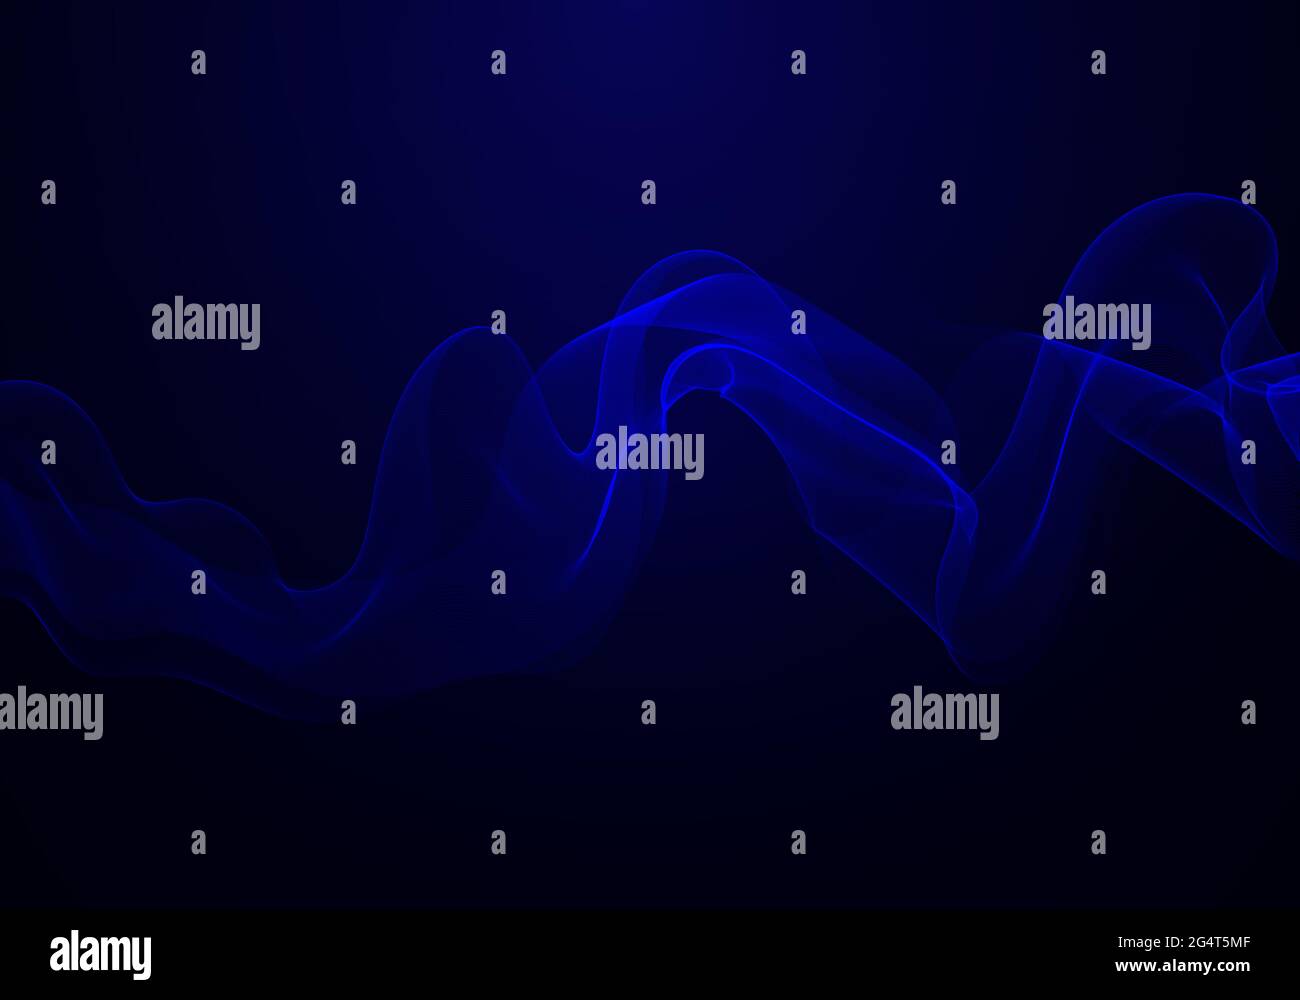 Vector Abstract shiny color blue wave design element on dark background. Stock Vector